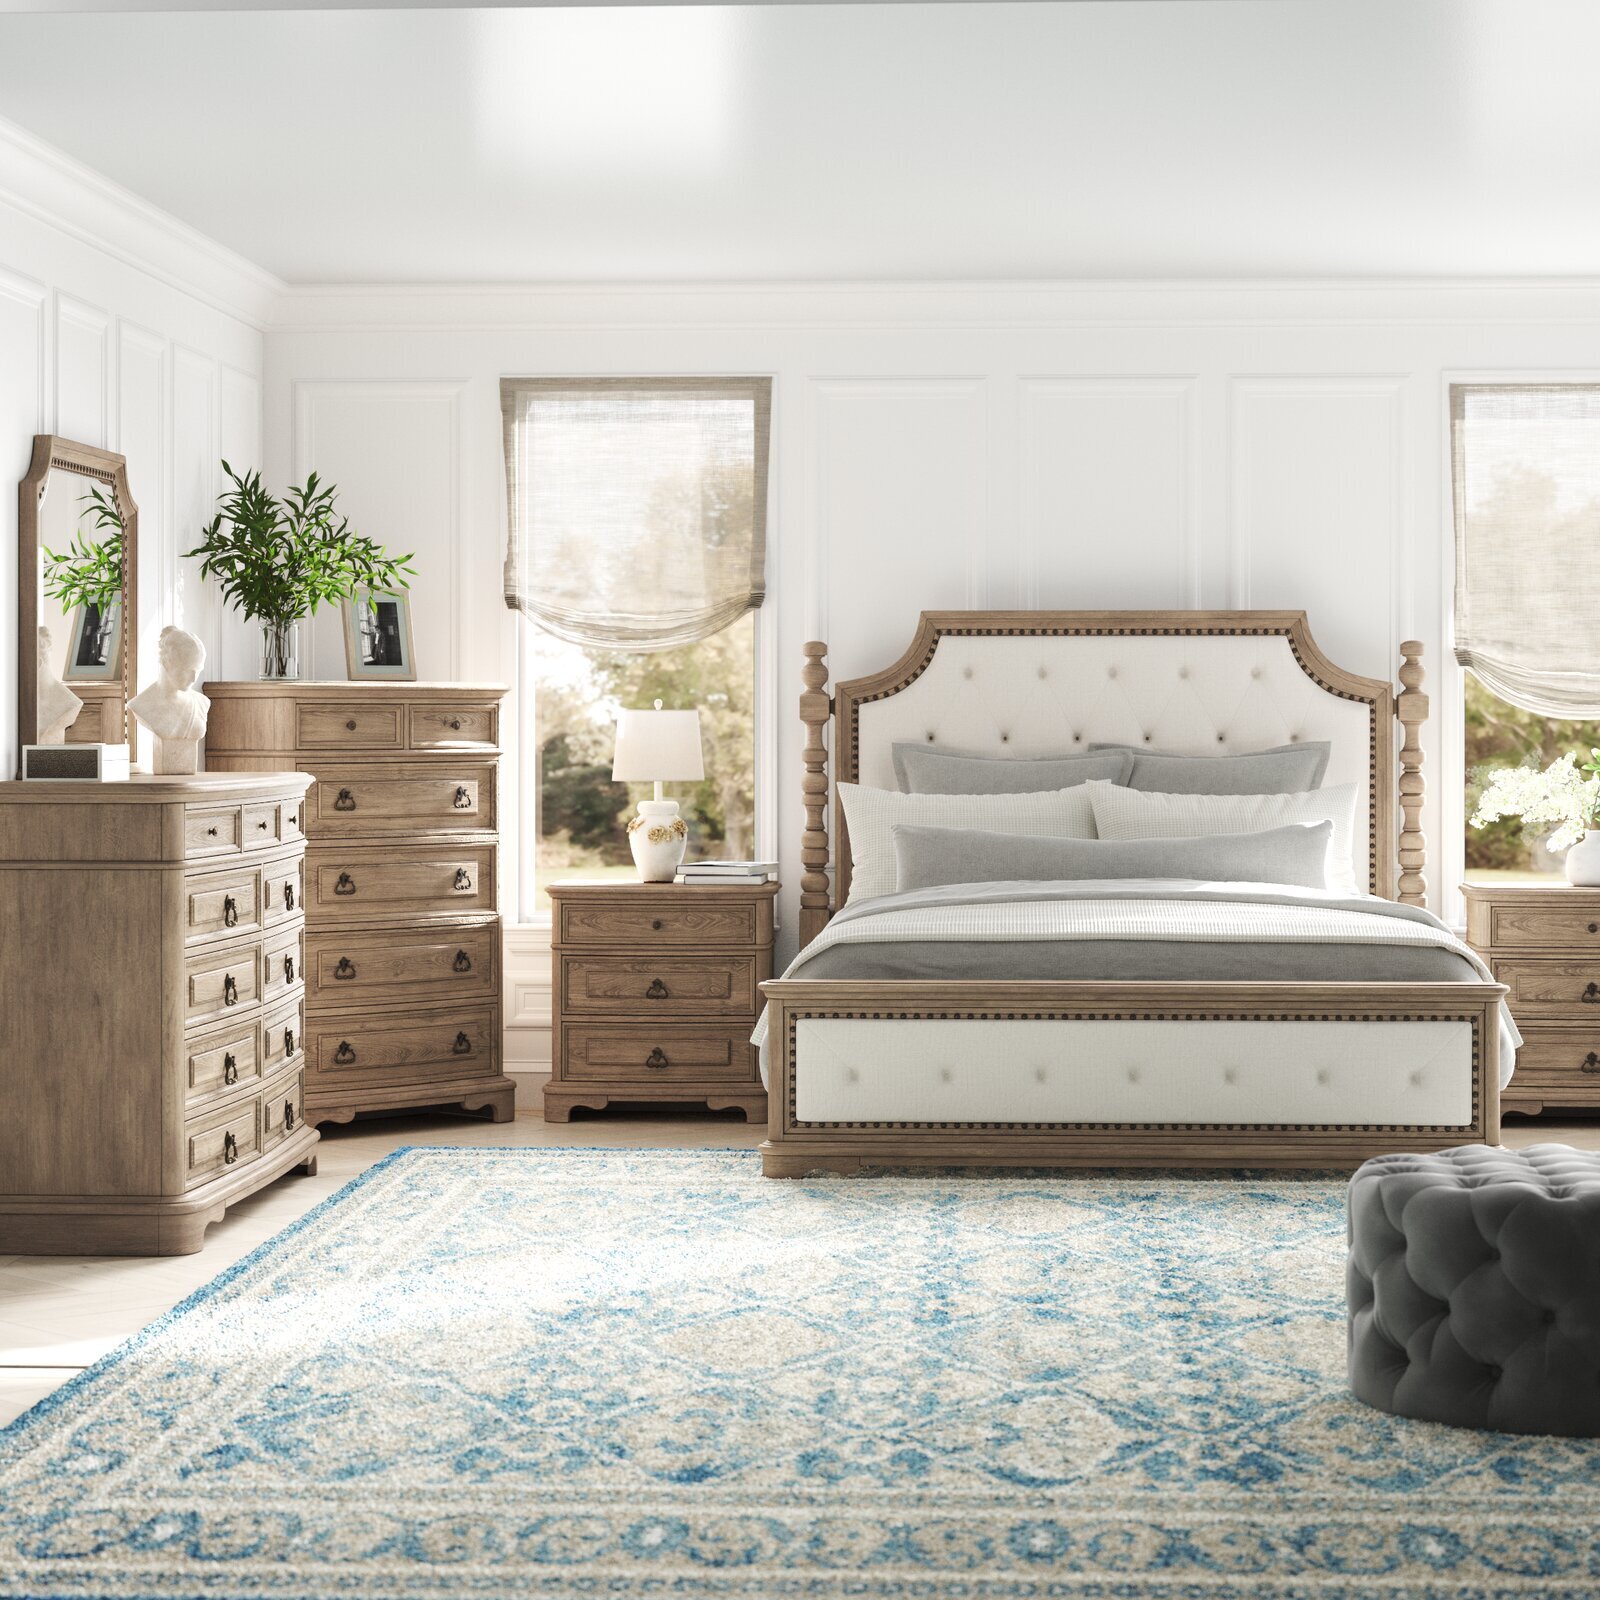 French country bedroom set with vintage touches